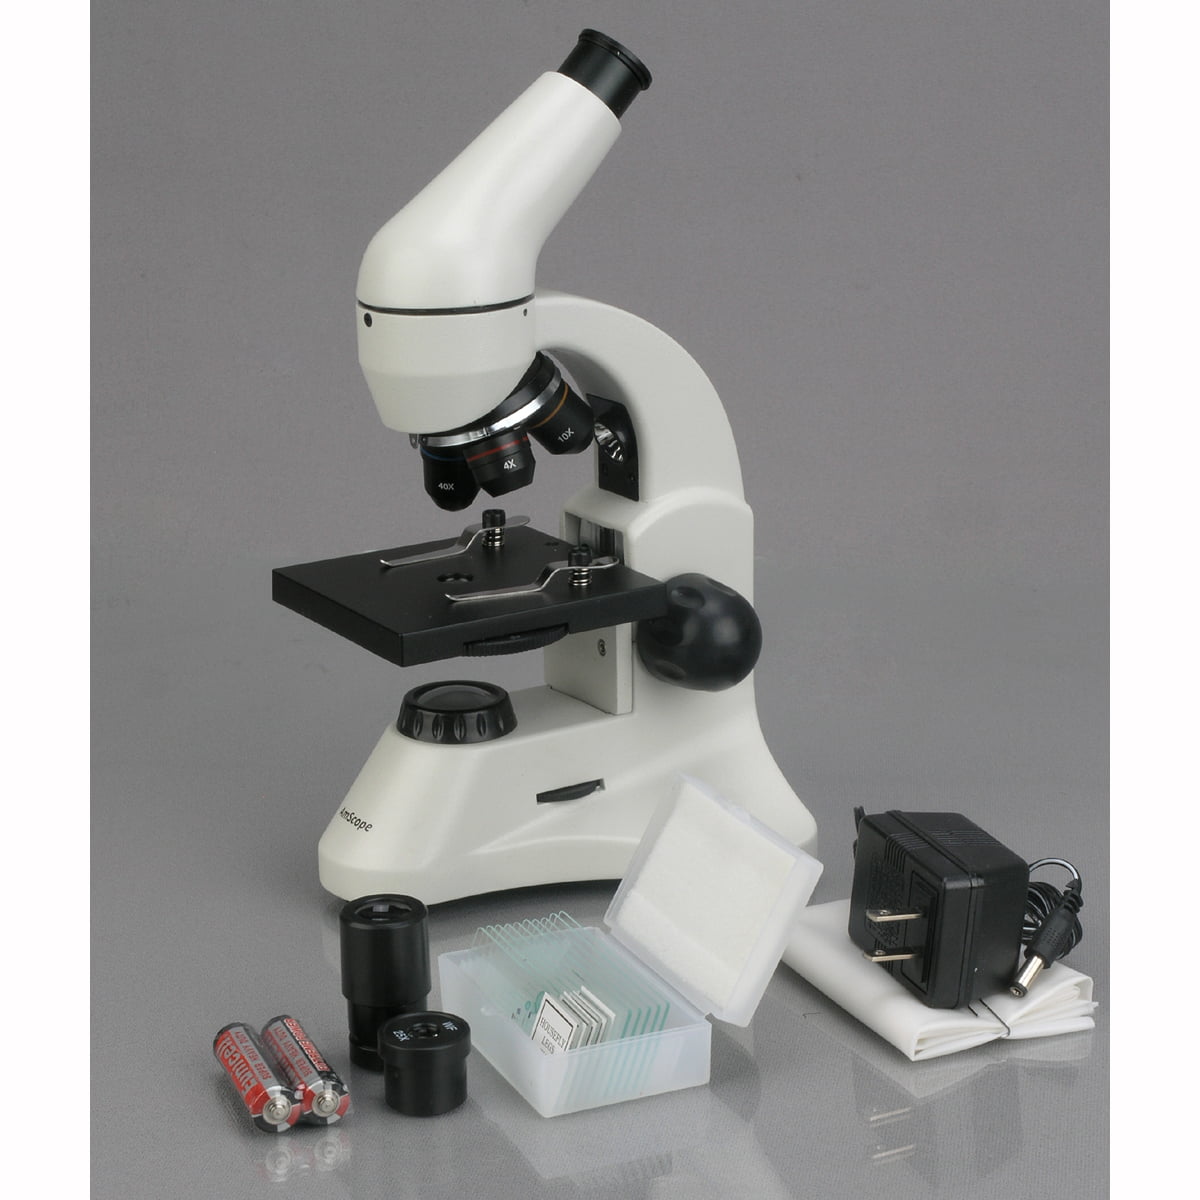 Upper and Lower LED Illumination and Introductory Microscopy Book 40x-800x Magnification WF10x and WF20x Eyepieces Plain Stage Brightfield Includes Blank and Prepared Slides AmScope M120B-2L-PB10 Compound Monocular Microscope 